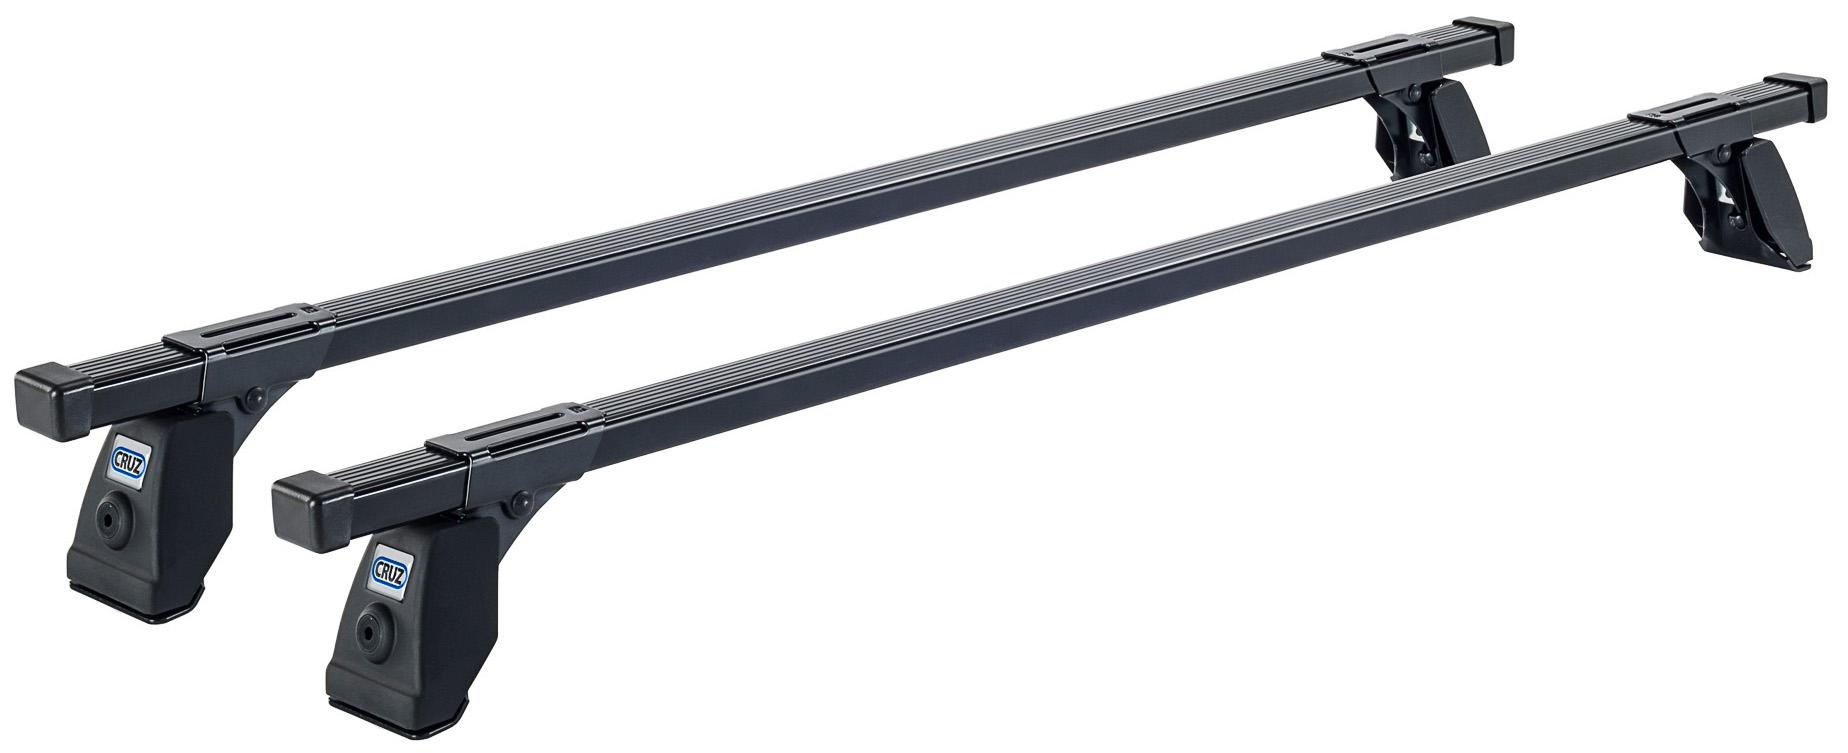 Cruz Commercial Roof Bars 30 X 20 911-405 - Pack Of 2